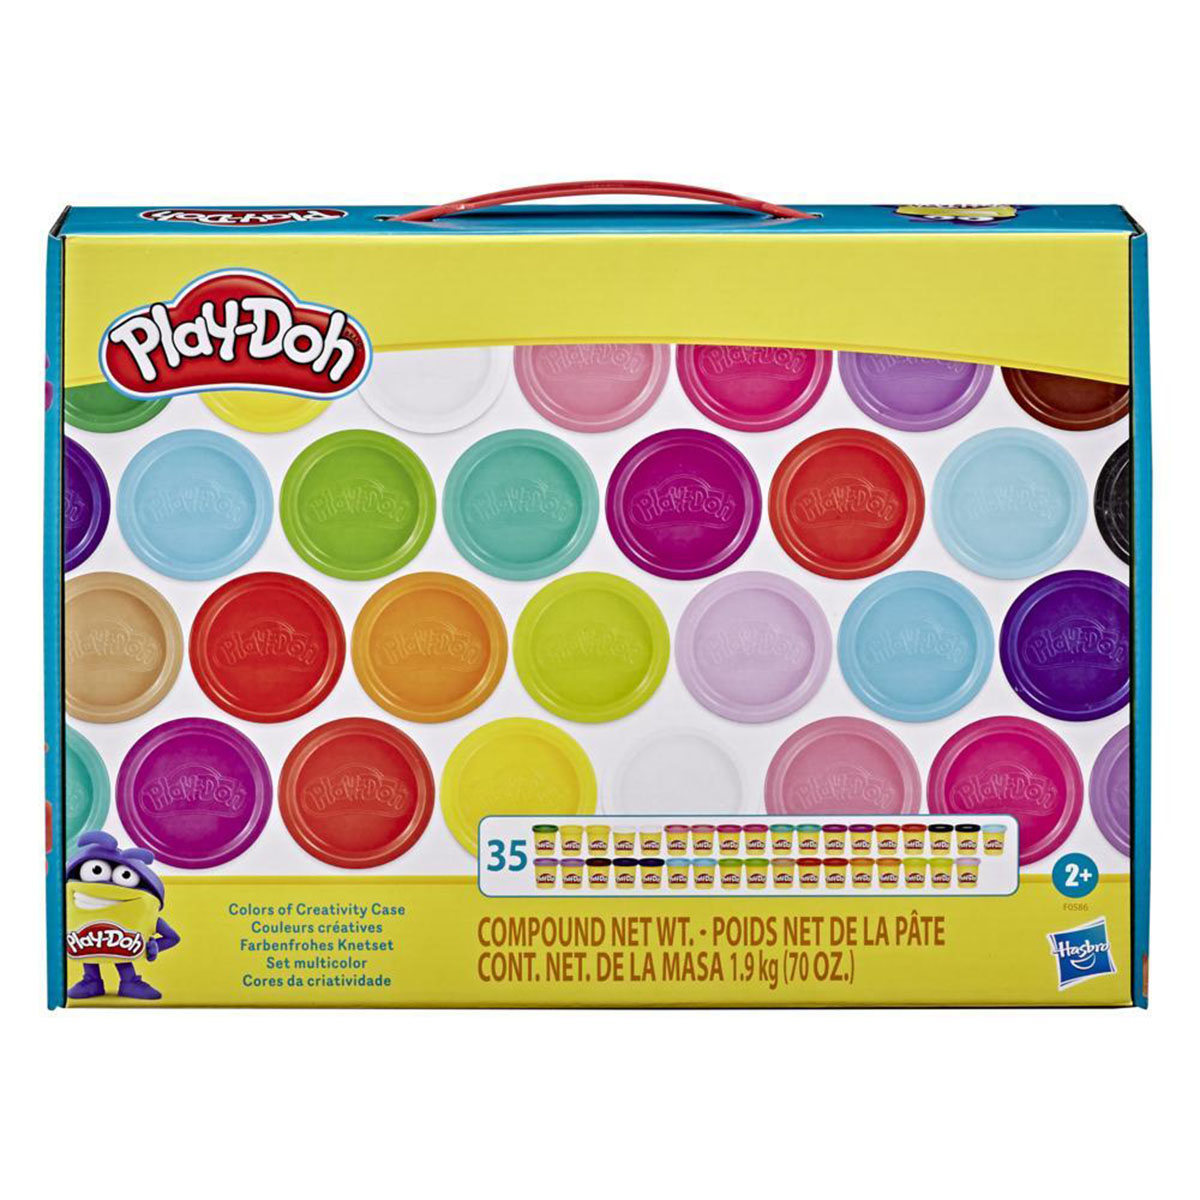 Play-Doh(R) Colors Of Creativity Case W/ 35 2oz. Cans